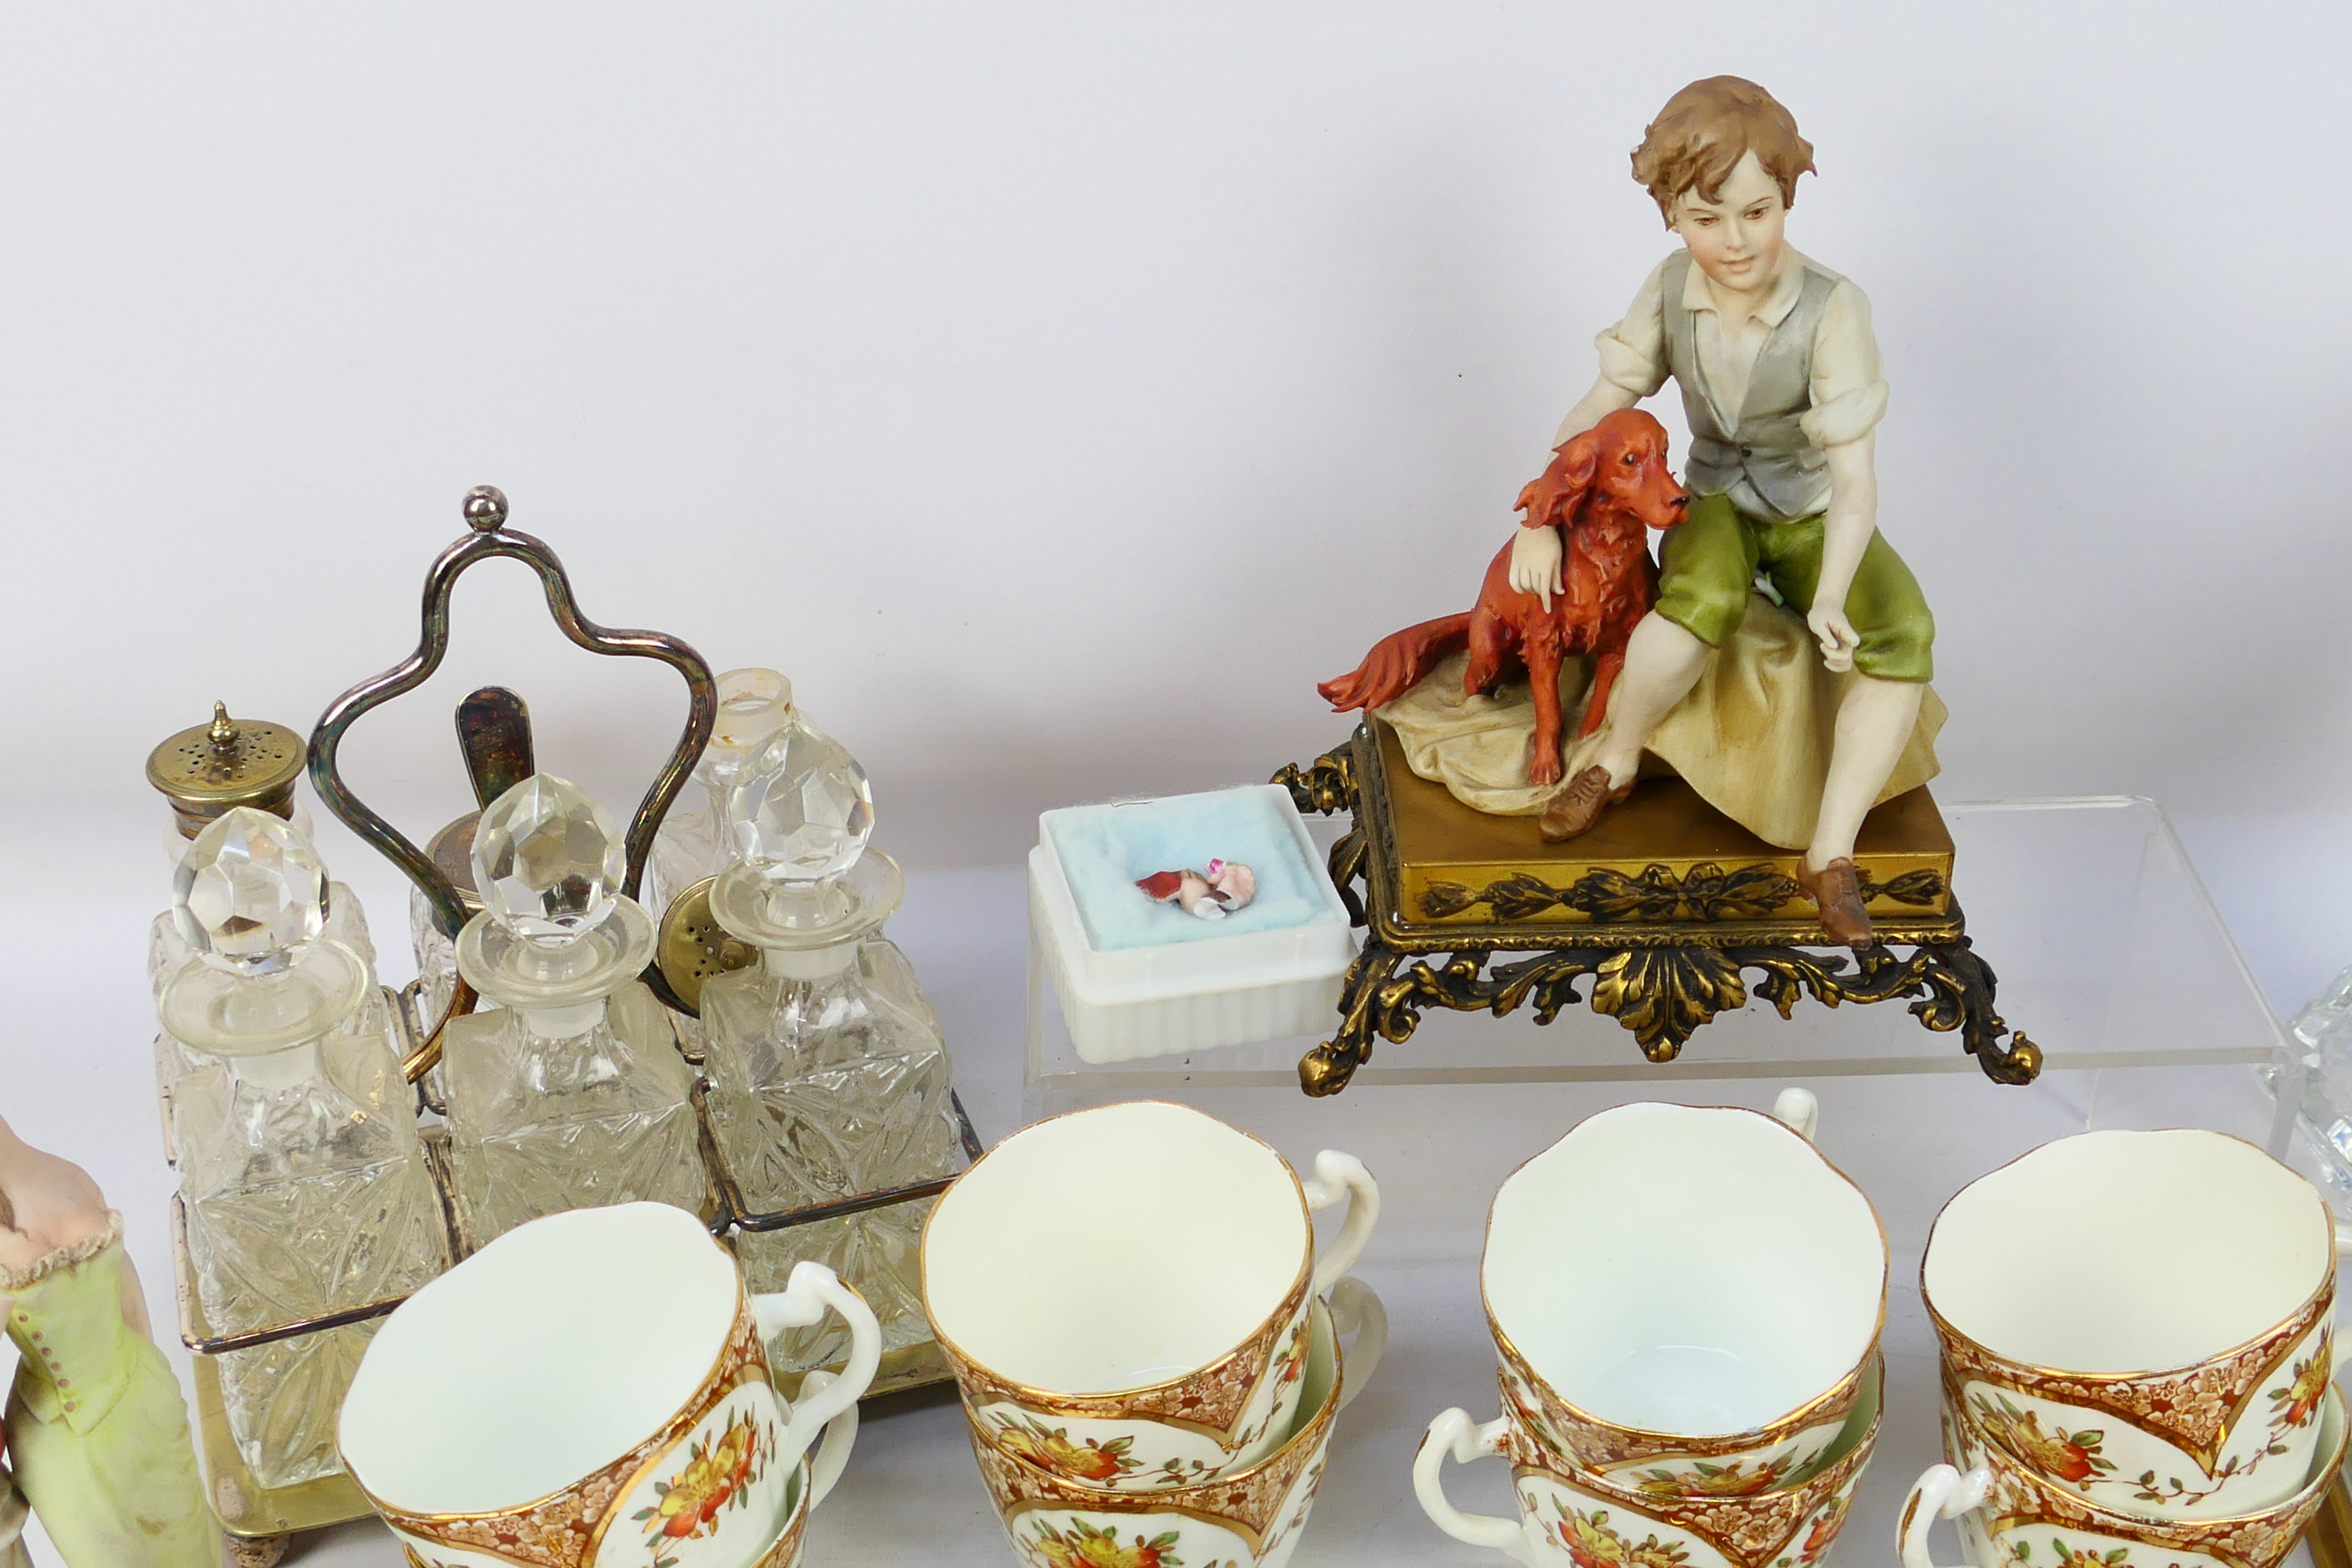 Lot to include late 19th or early 20th century tea wares, decanter, cruet set, Capodimonte figures. - Image 2 of 7